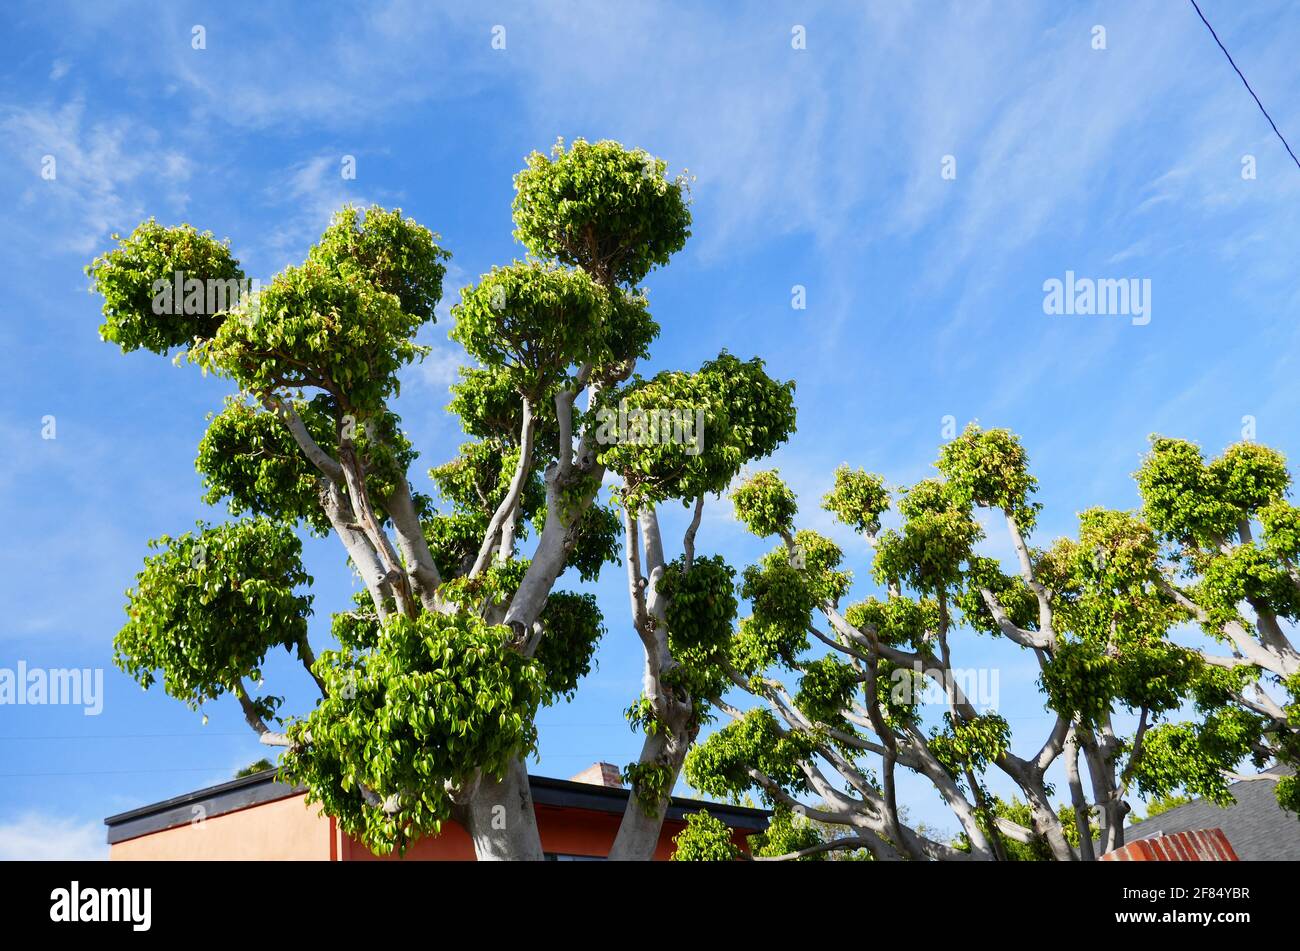 West Hollywood, California, USA 10th April 2021 A general view of atmosphere of actress Linda Hamilton, actress Jennifer Jason Leigh, actress Donna Dixon, actress Glynnis O'Connor's former home at 8955 Norma Place on April 10, 2021 in West Hollywood, California, USA. Photo by Barry King/Alamy Stock Photo Stock Photo